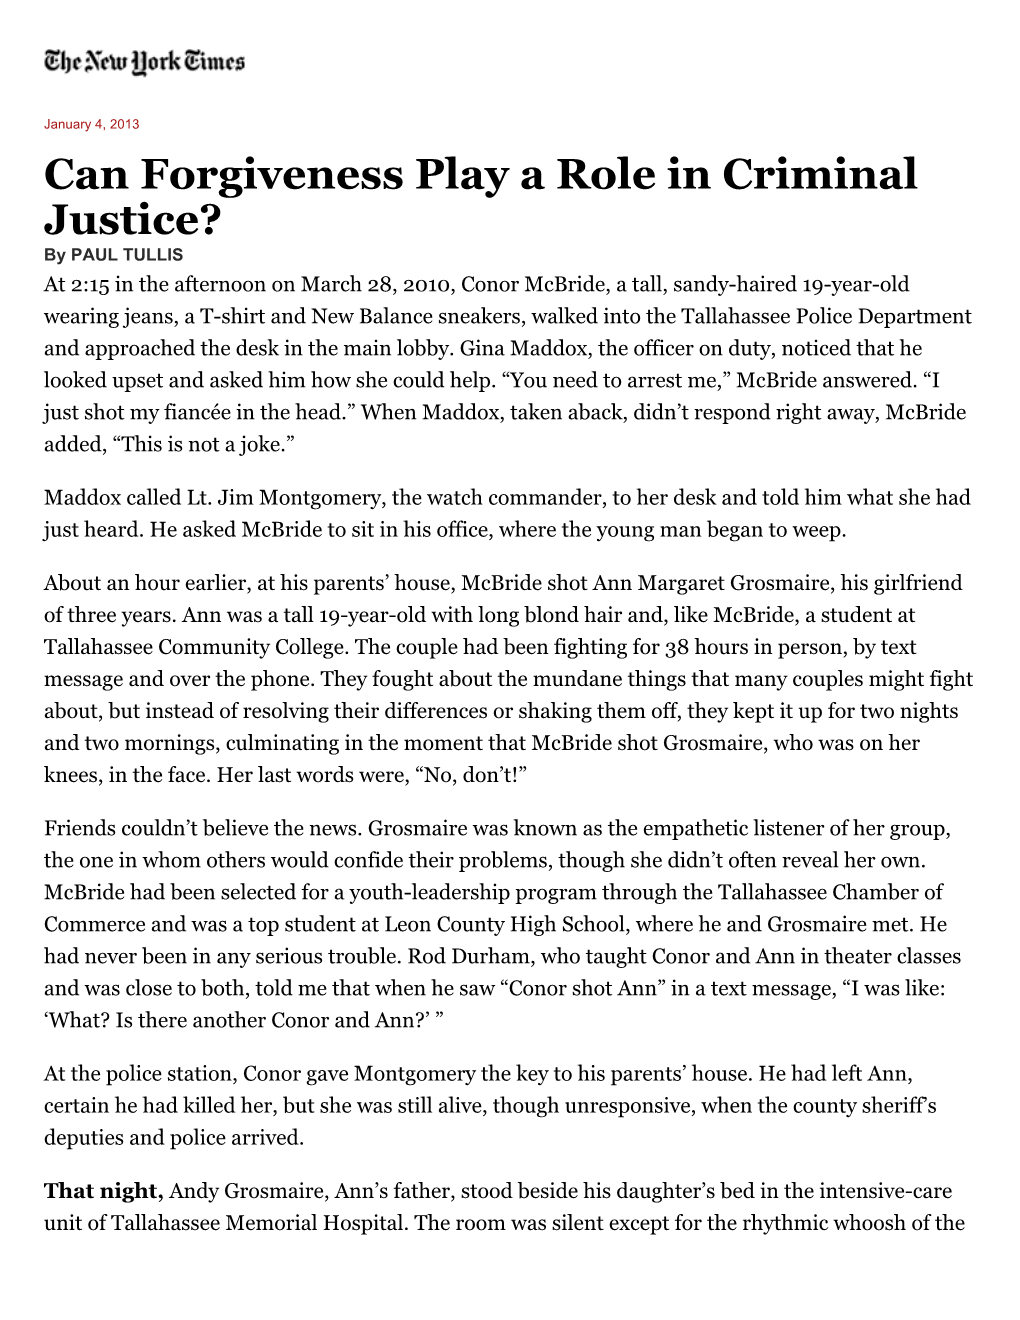 Can Forgiveness Play a Role in Criminal Justice?